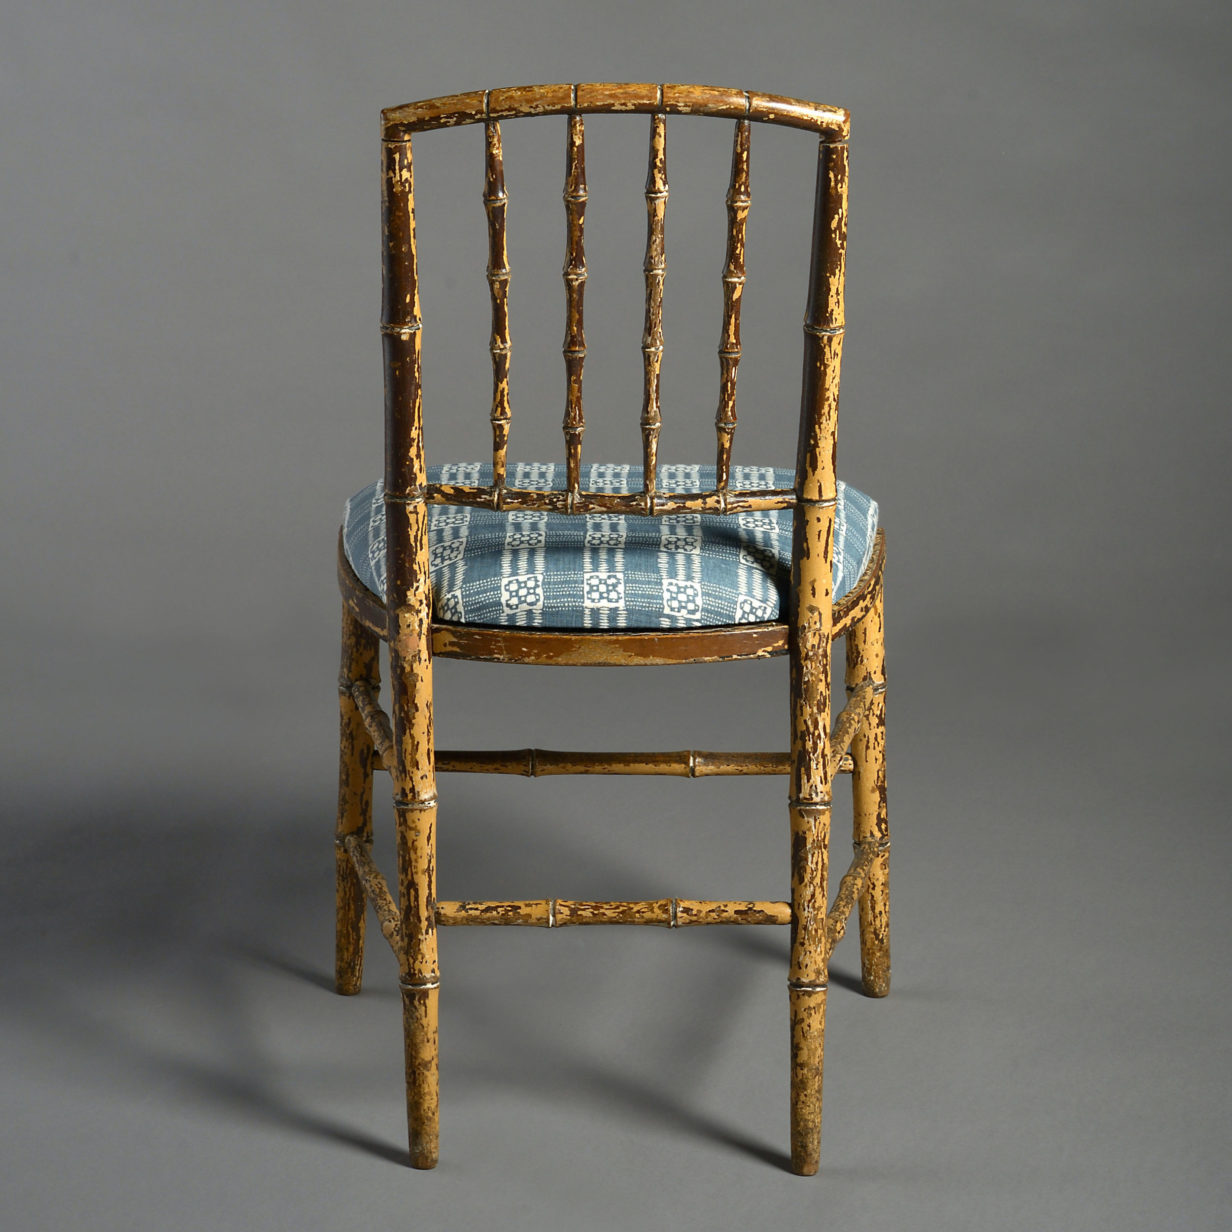 Early 19th century regency period painted faux bamboo side chair